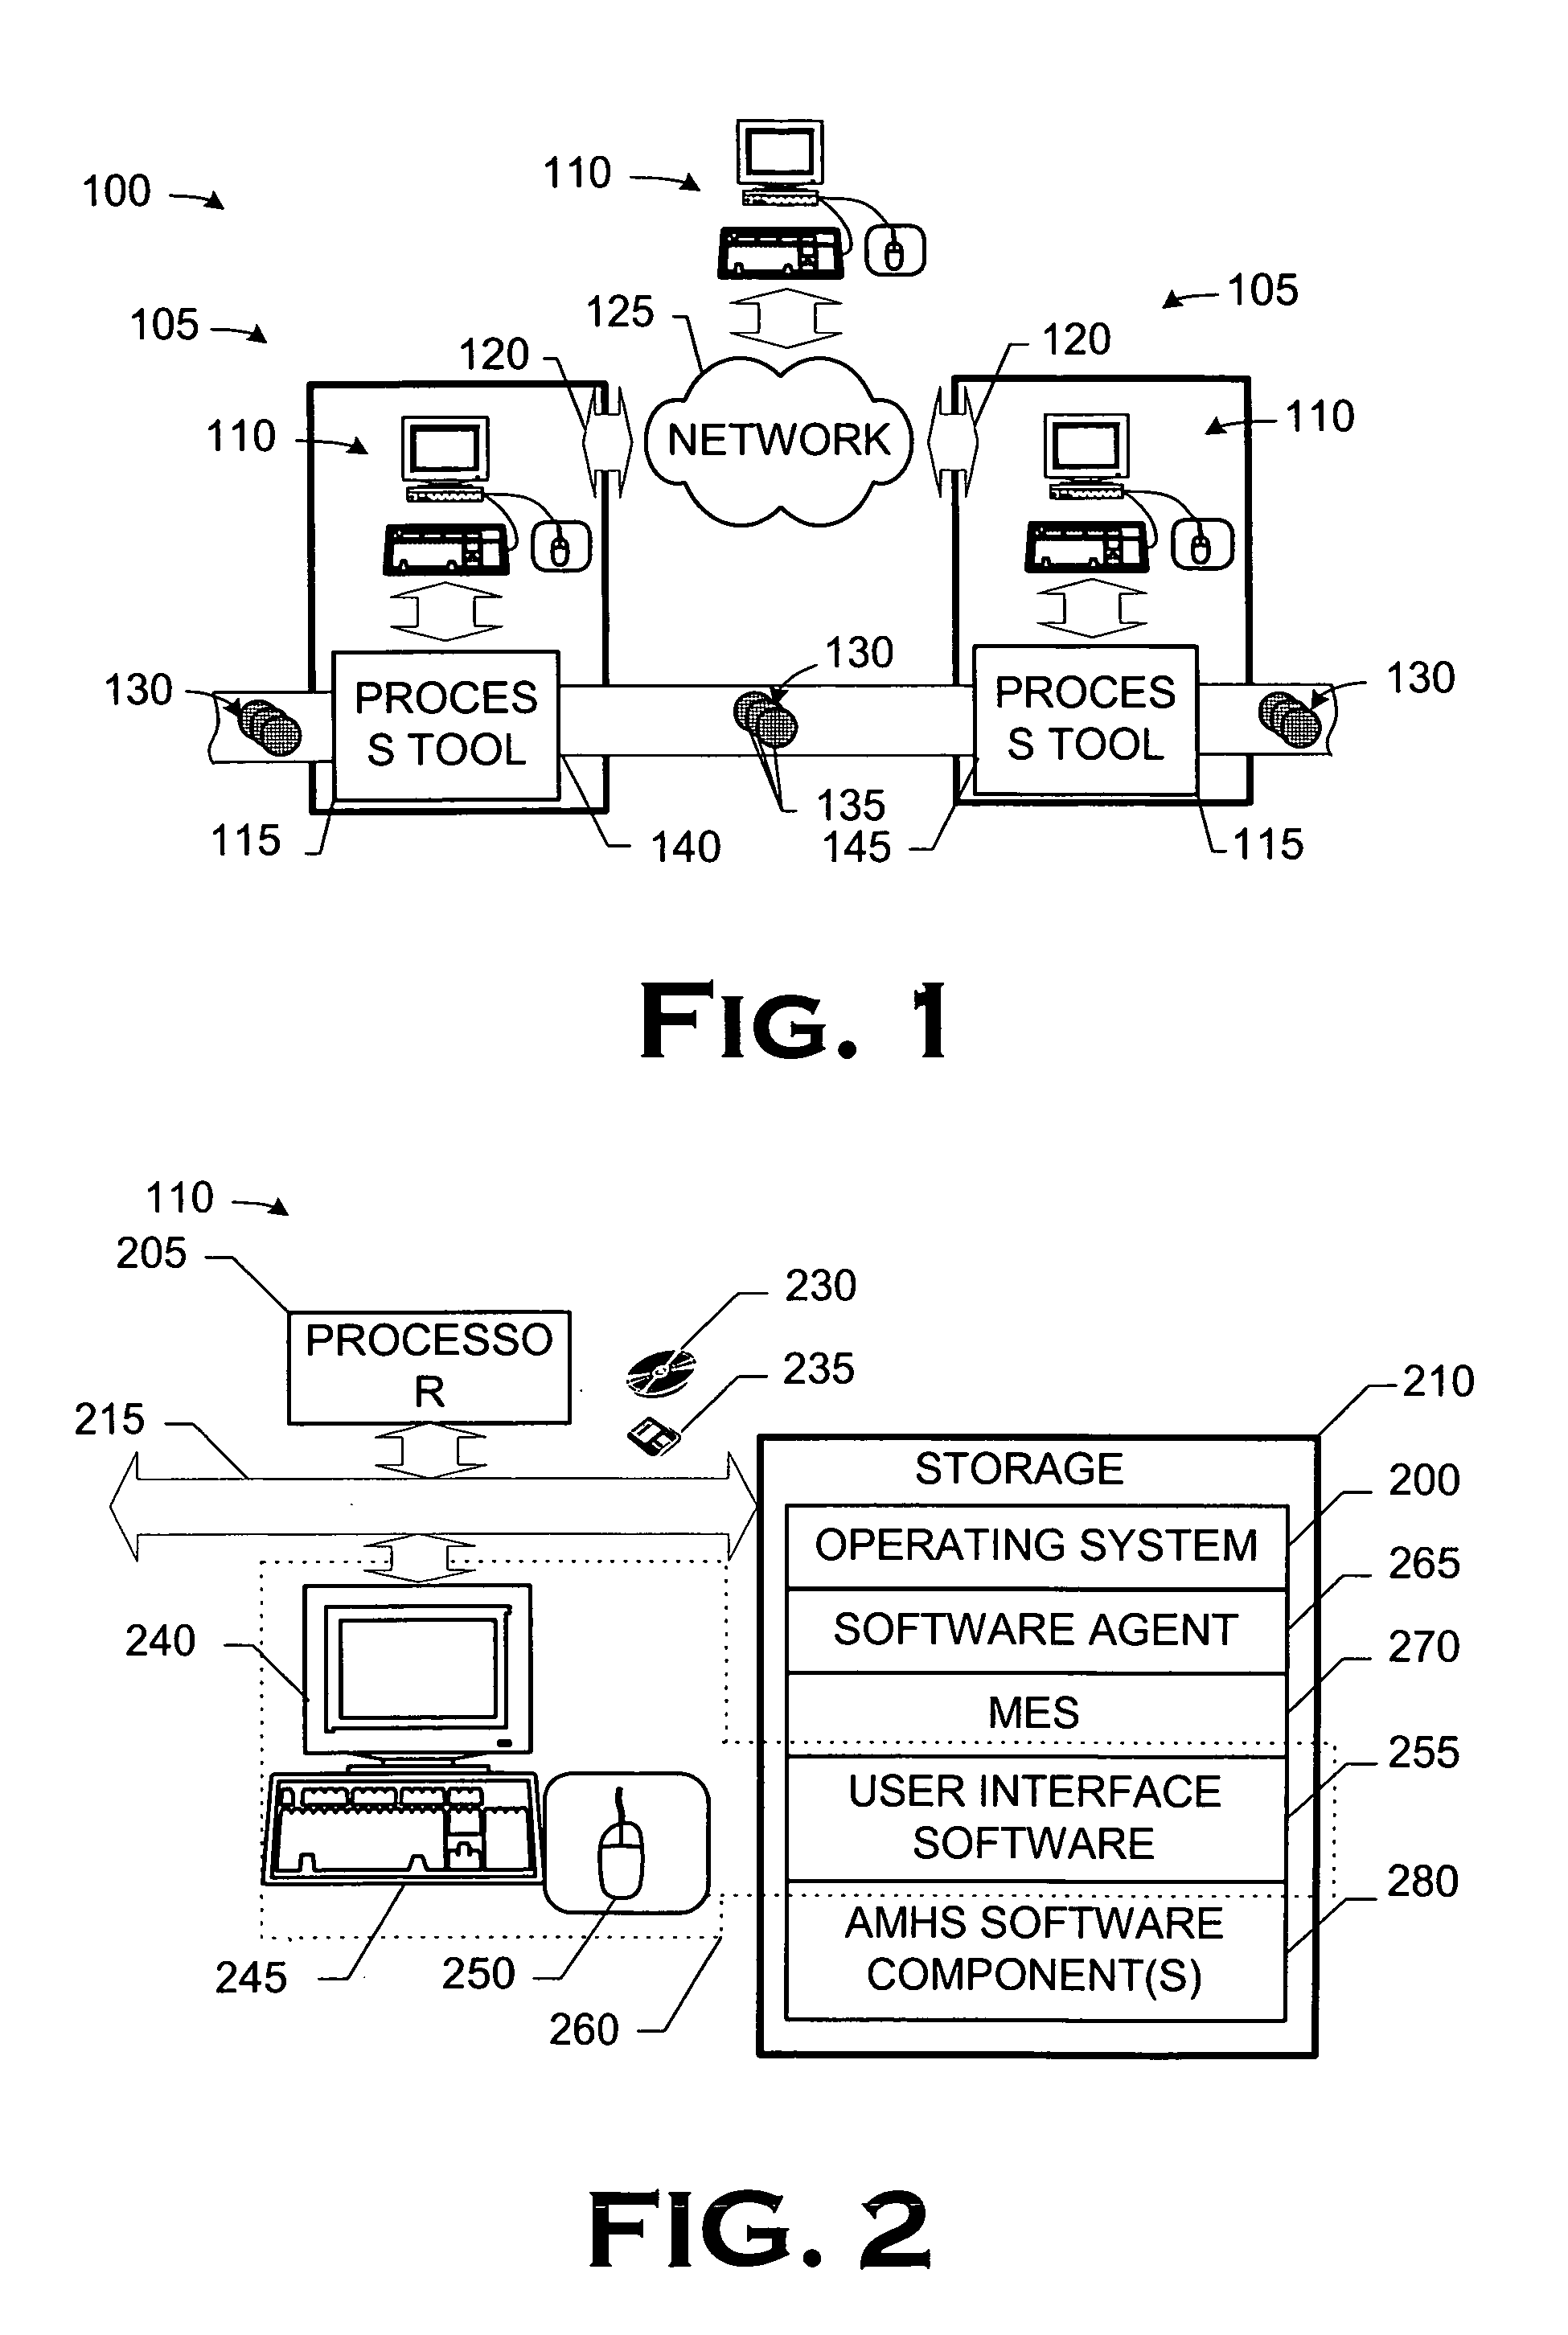 Agent reactive scheduling in an automated manufacturing environment